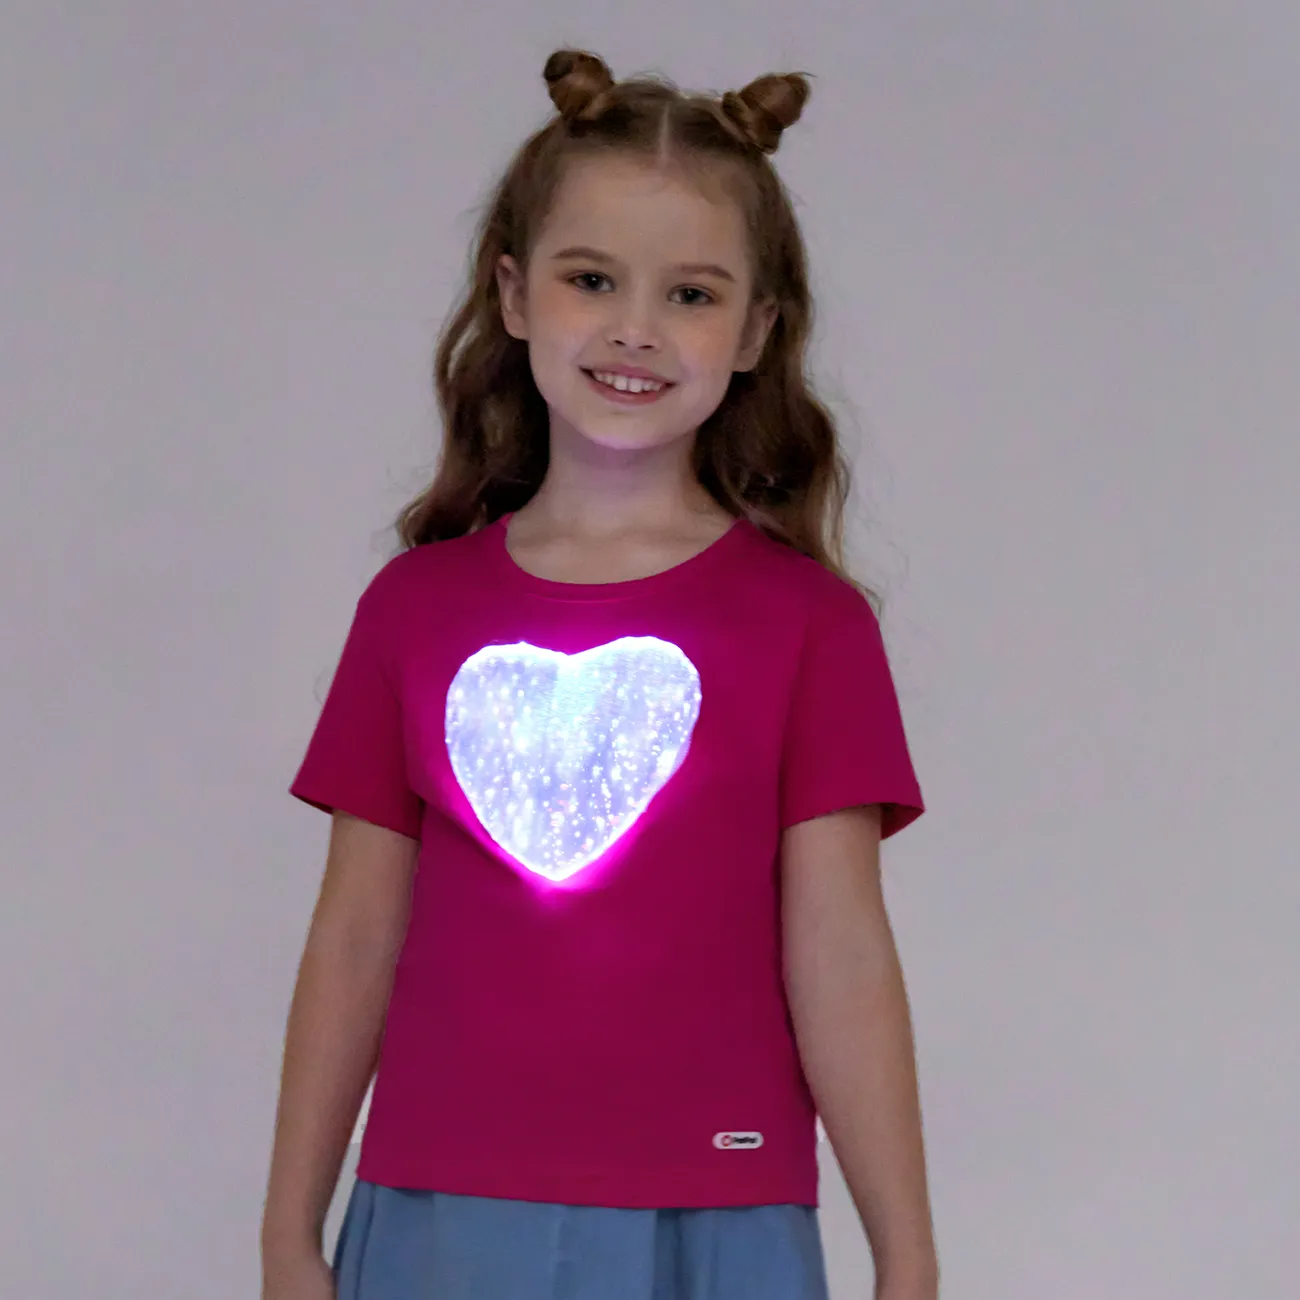 Go-Glow Illuminating T-shirt with Removable Light Up Heart-Shaped Bag Including Controller (Built-In Battery) Hot Pink big image 1